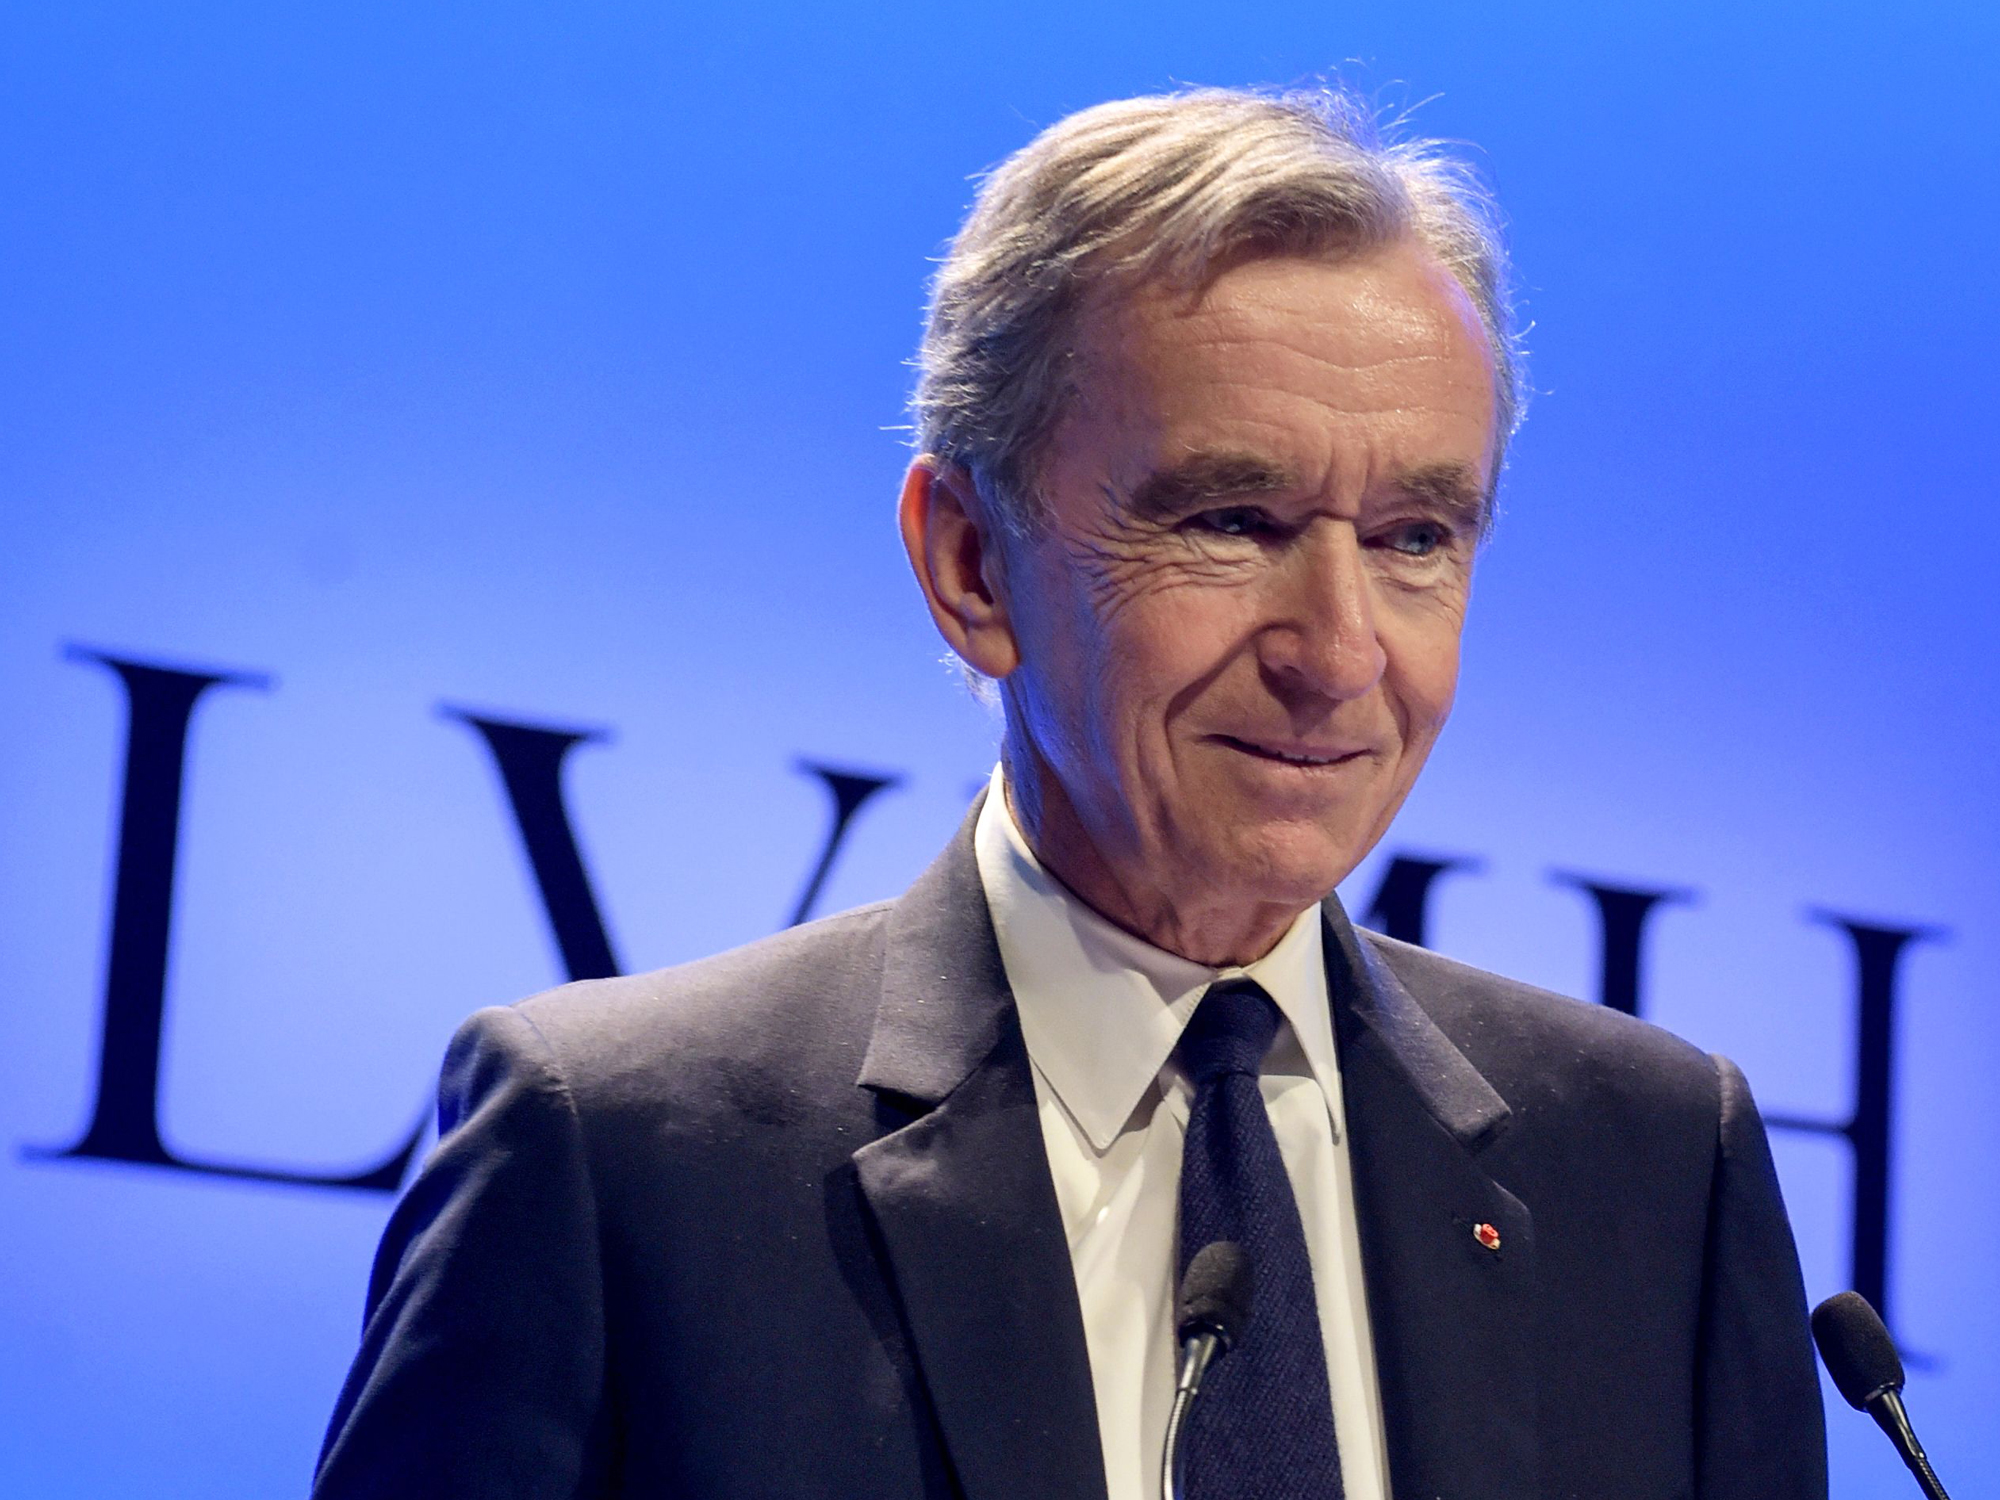 LVMH's Acquisition of Tiffany Gets French Government's Veto